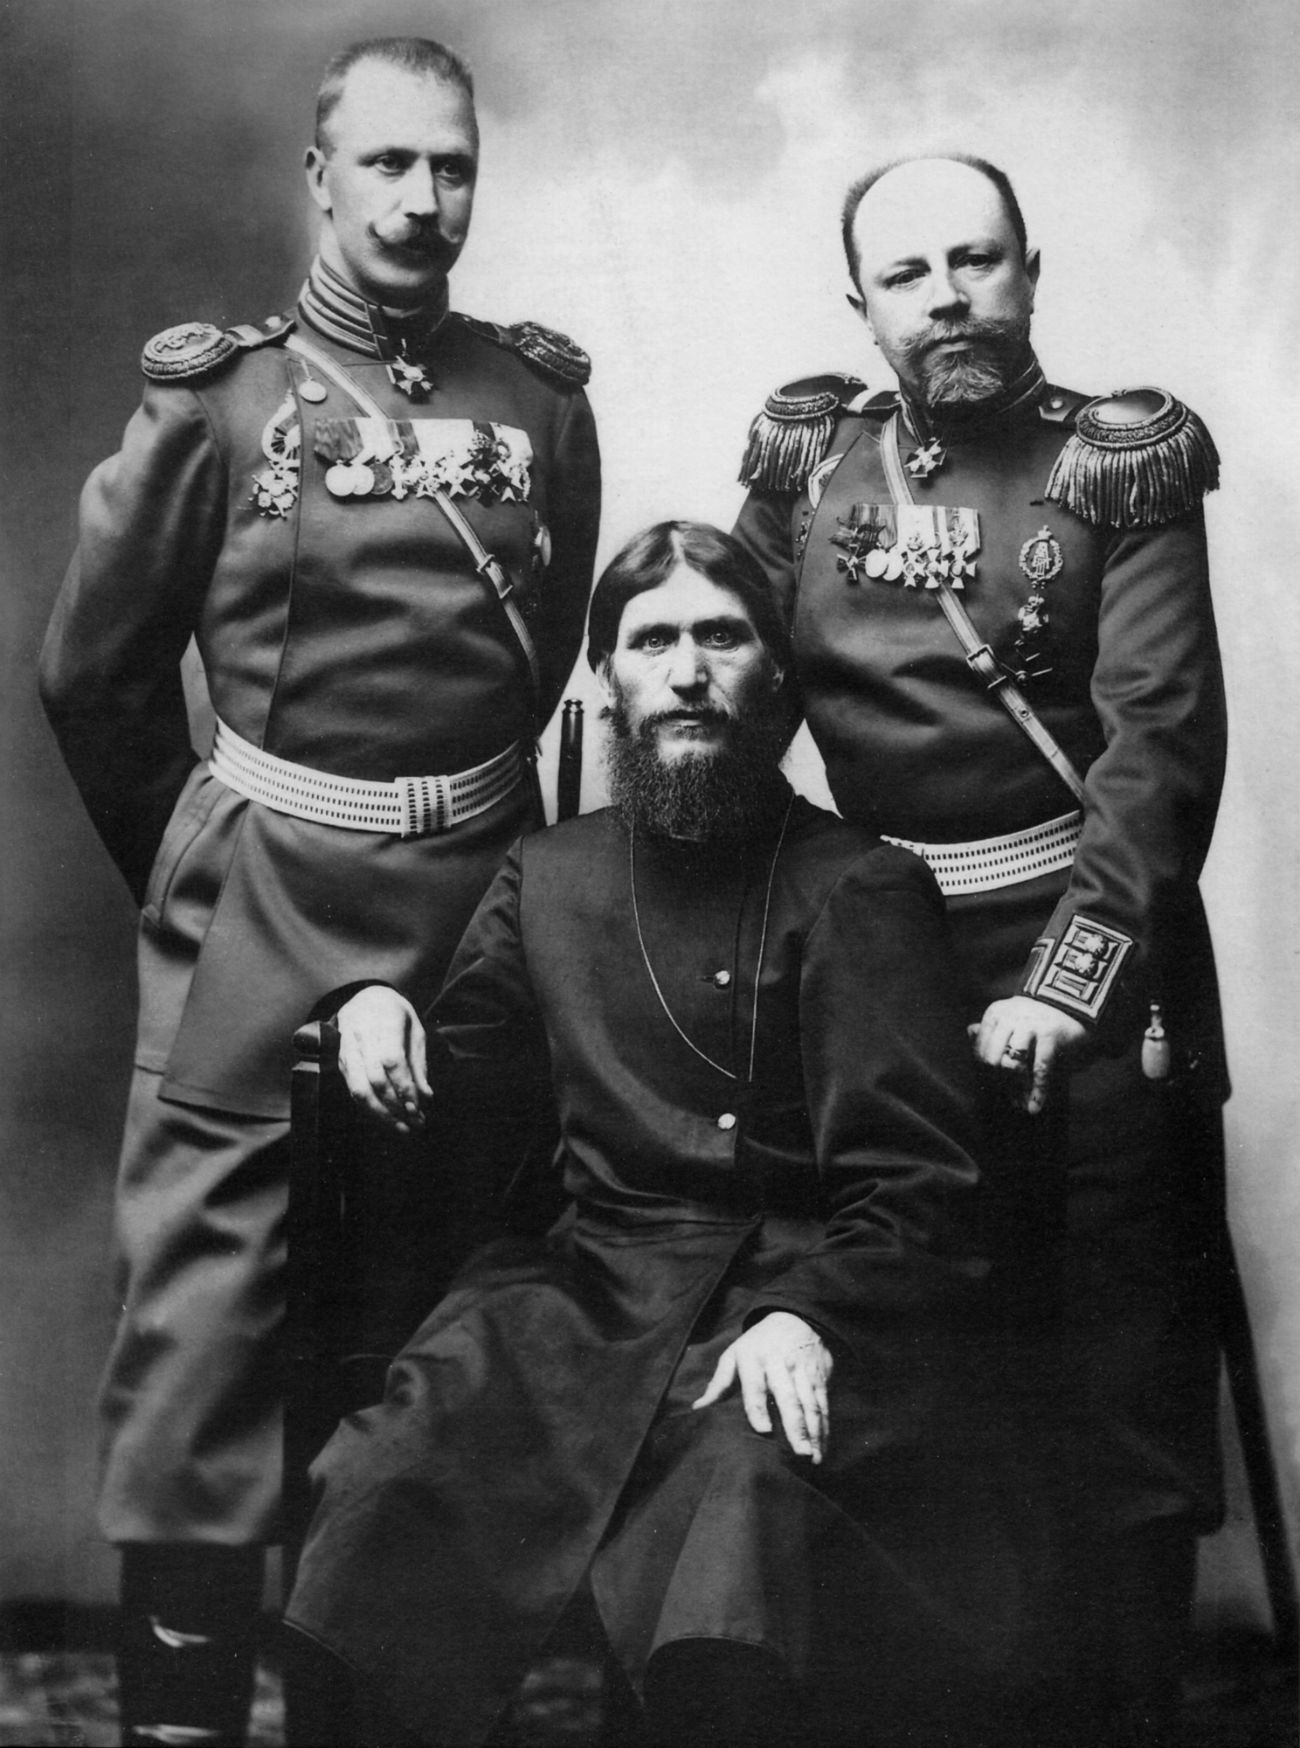 He was also the official photographer of many state organizations, including the Interior Ministry, the Navy and Army Ministries, and the State Duma. // L-R: Colonel Loman, Grigory Rasputin, General Putyatin